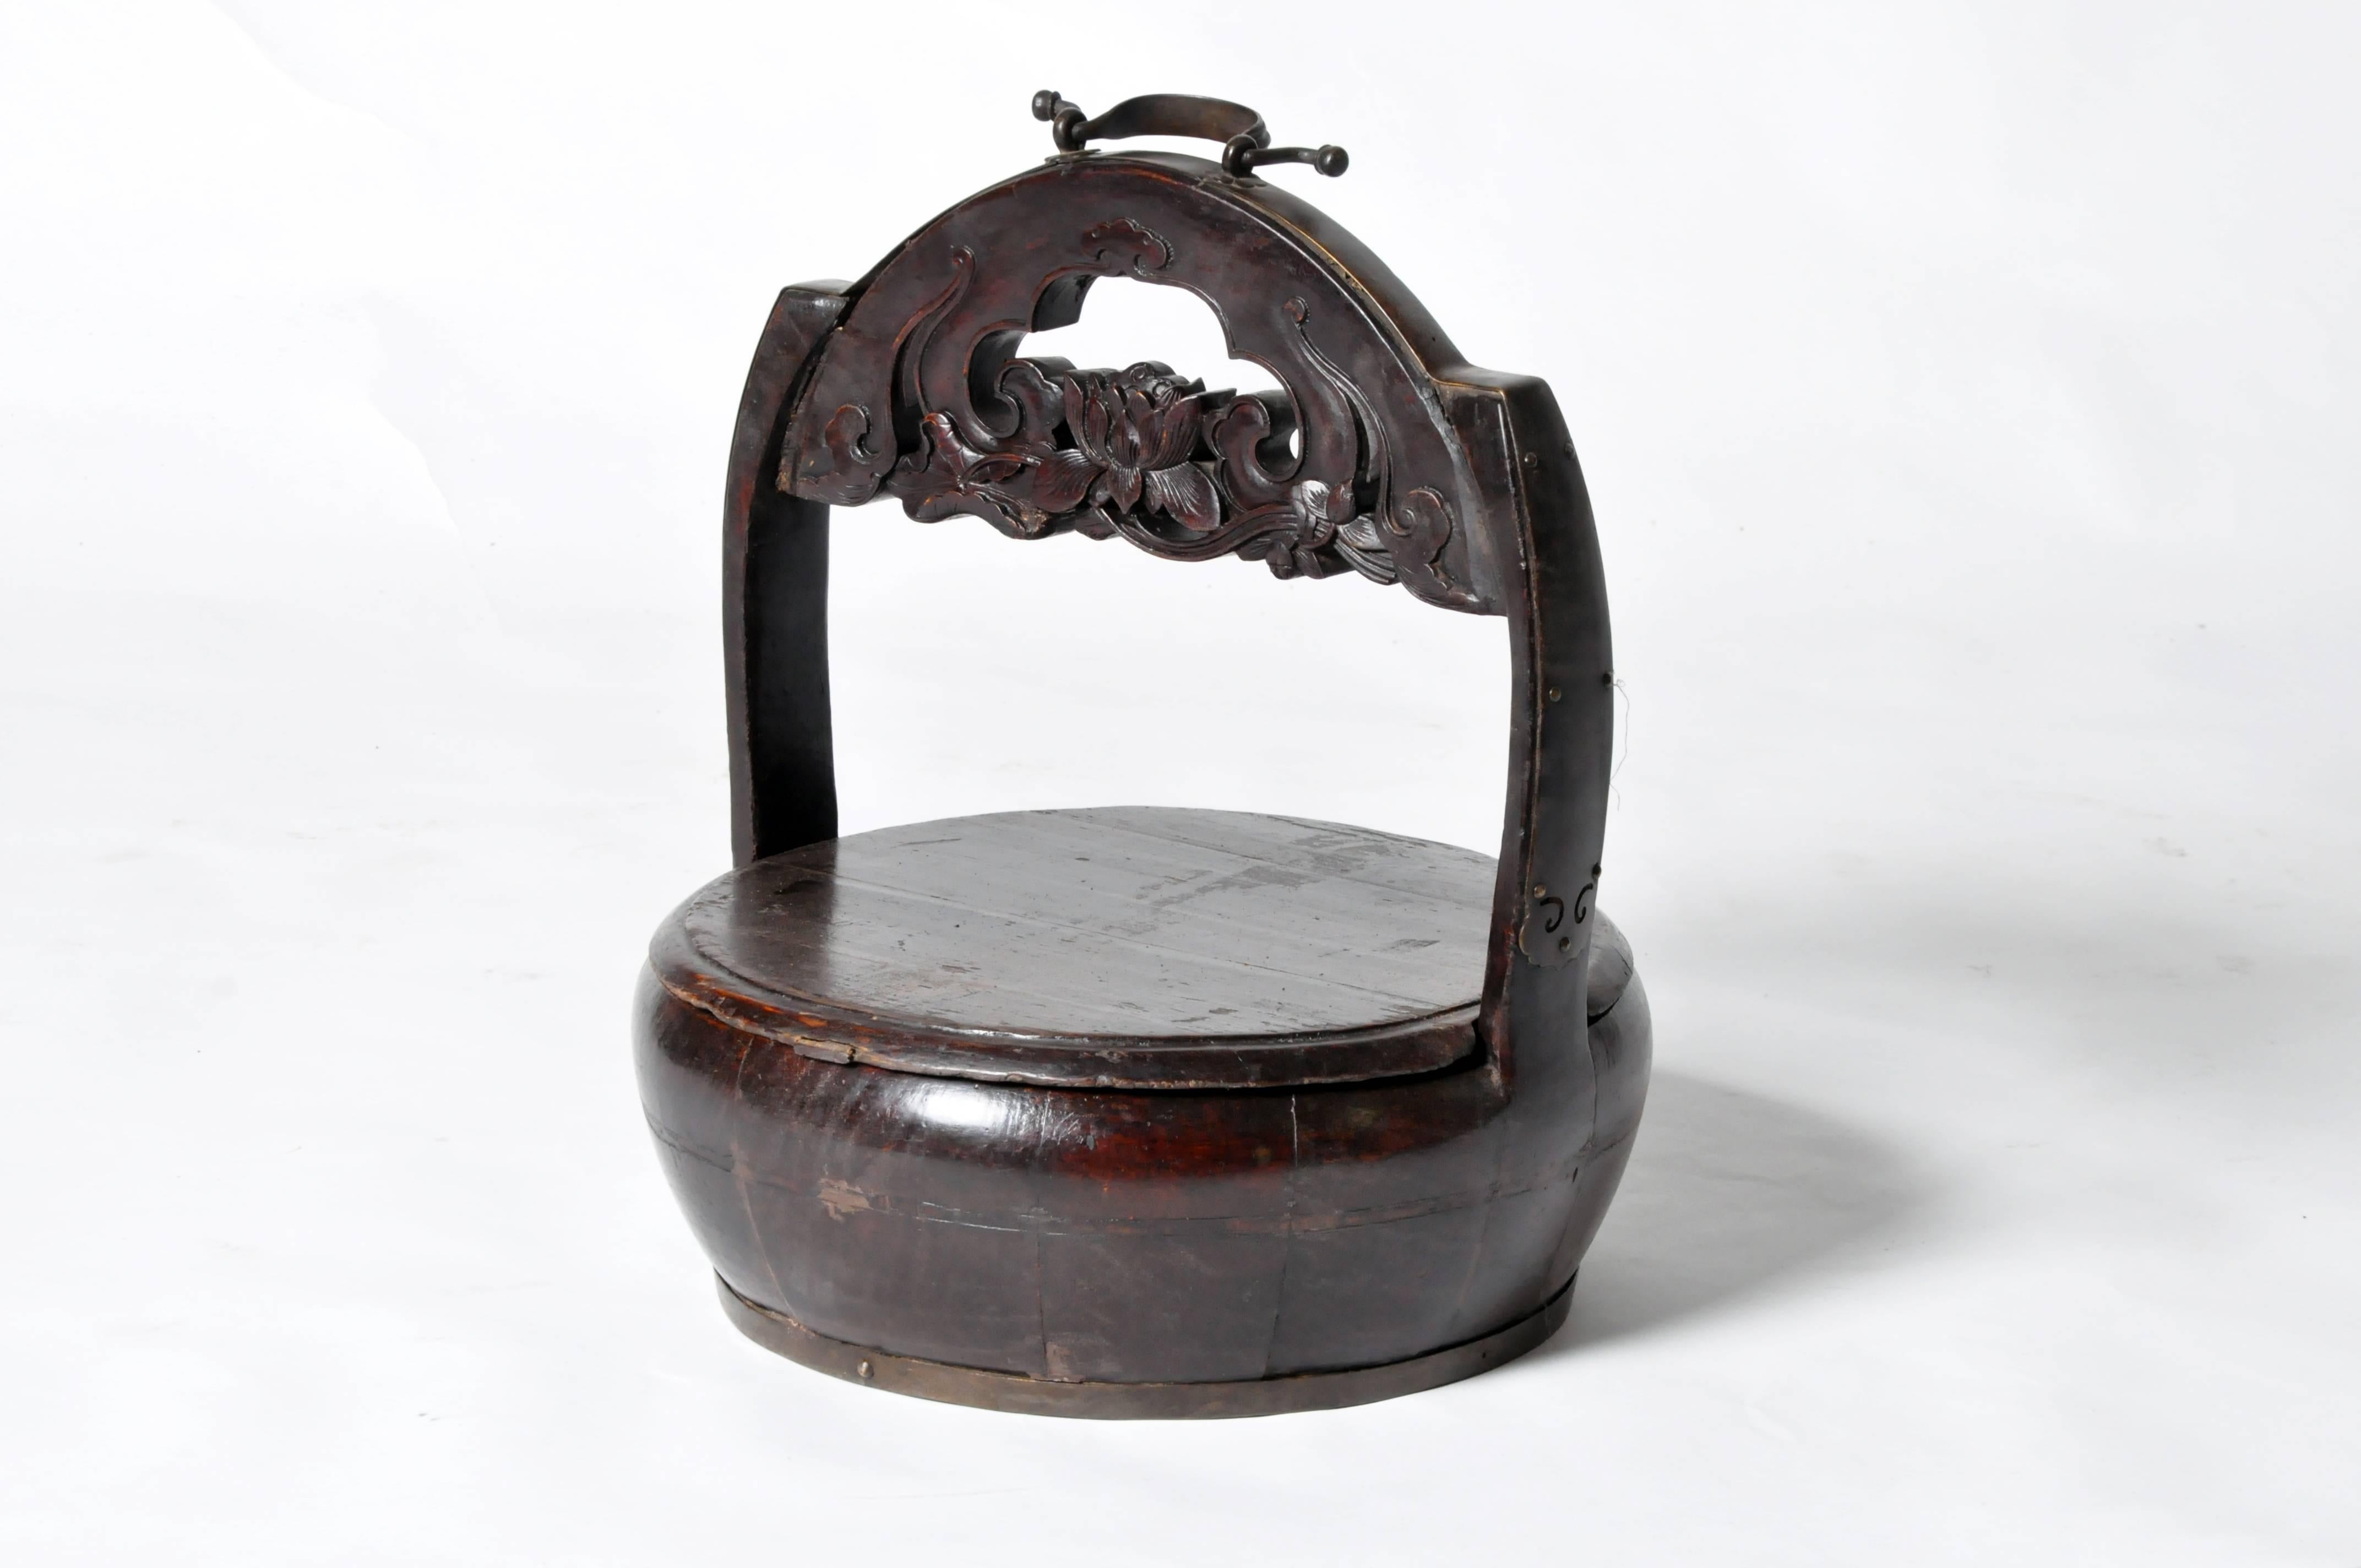 This Chinese food carrier is from Fujian, China and is made from softwood.